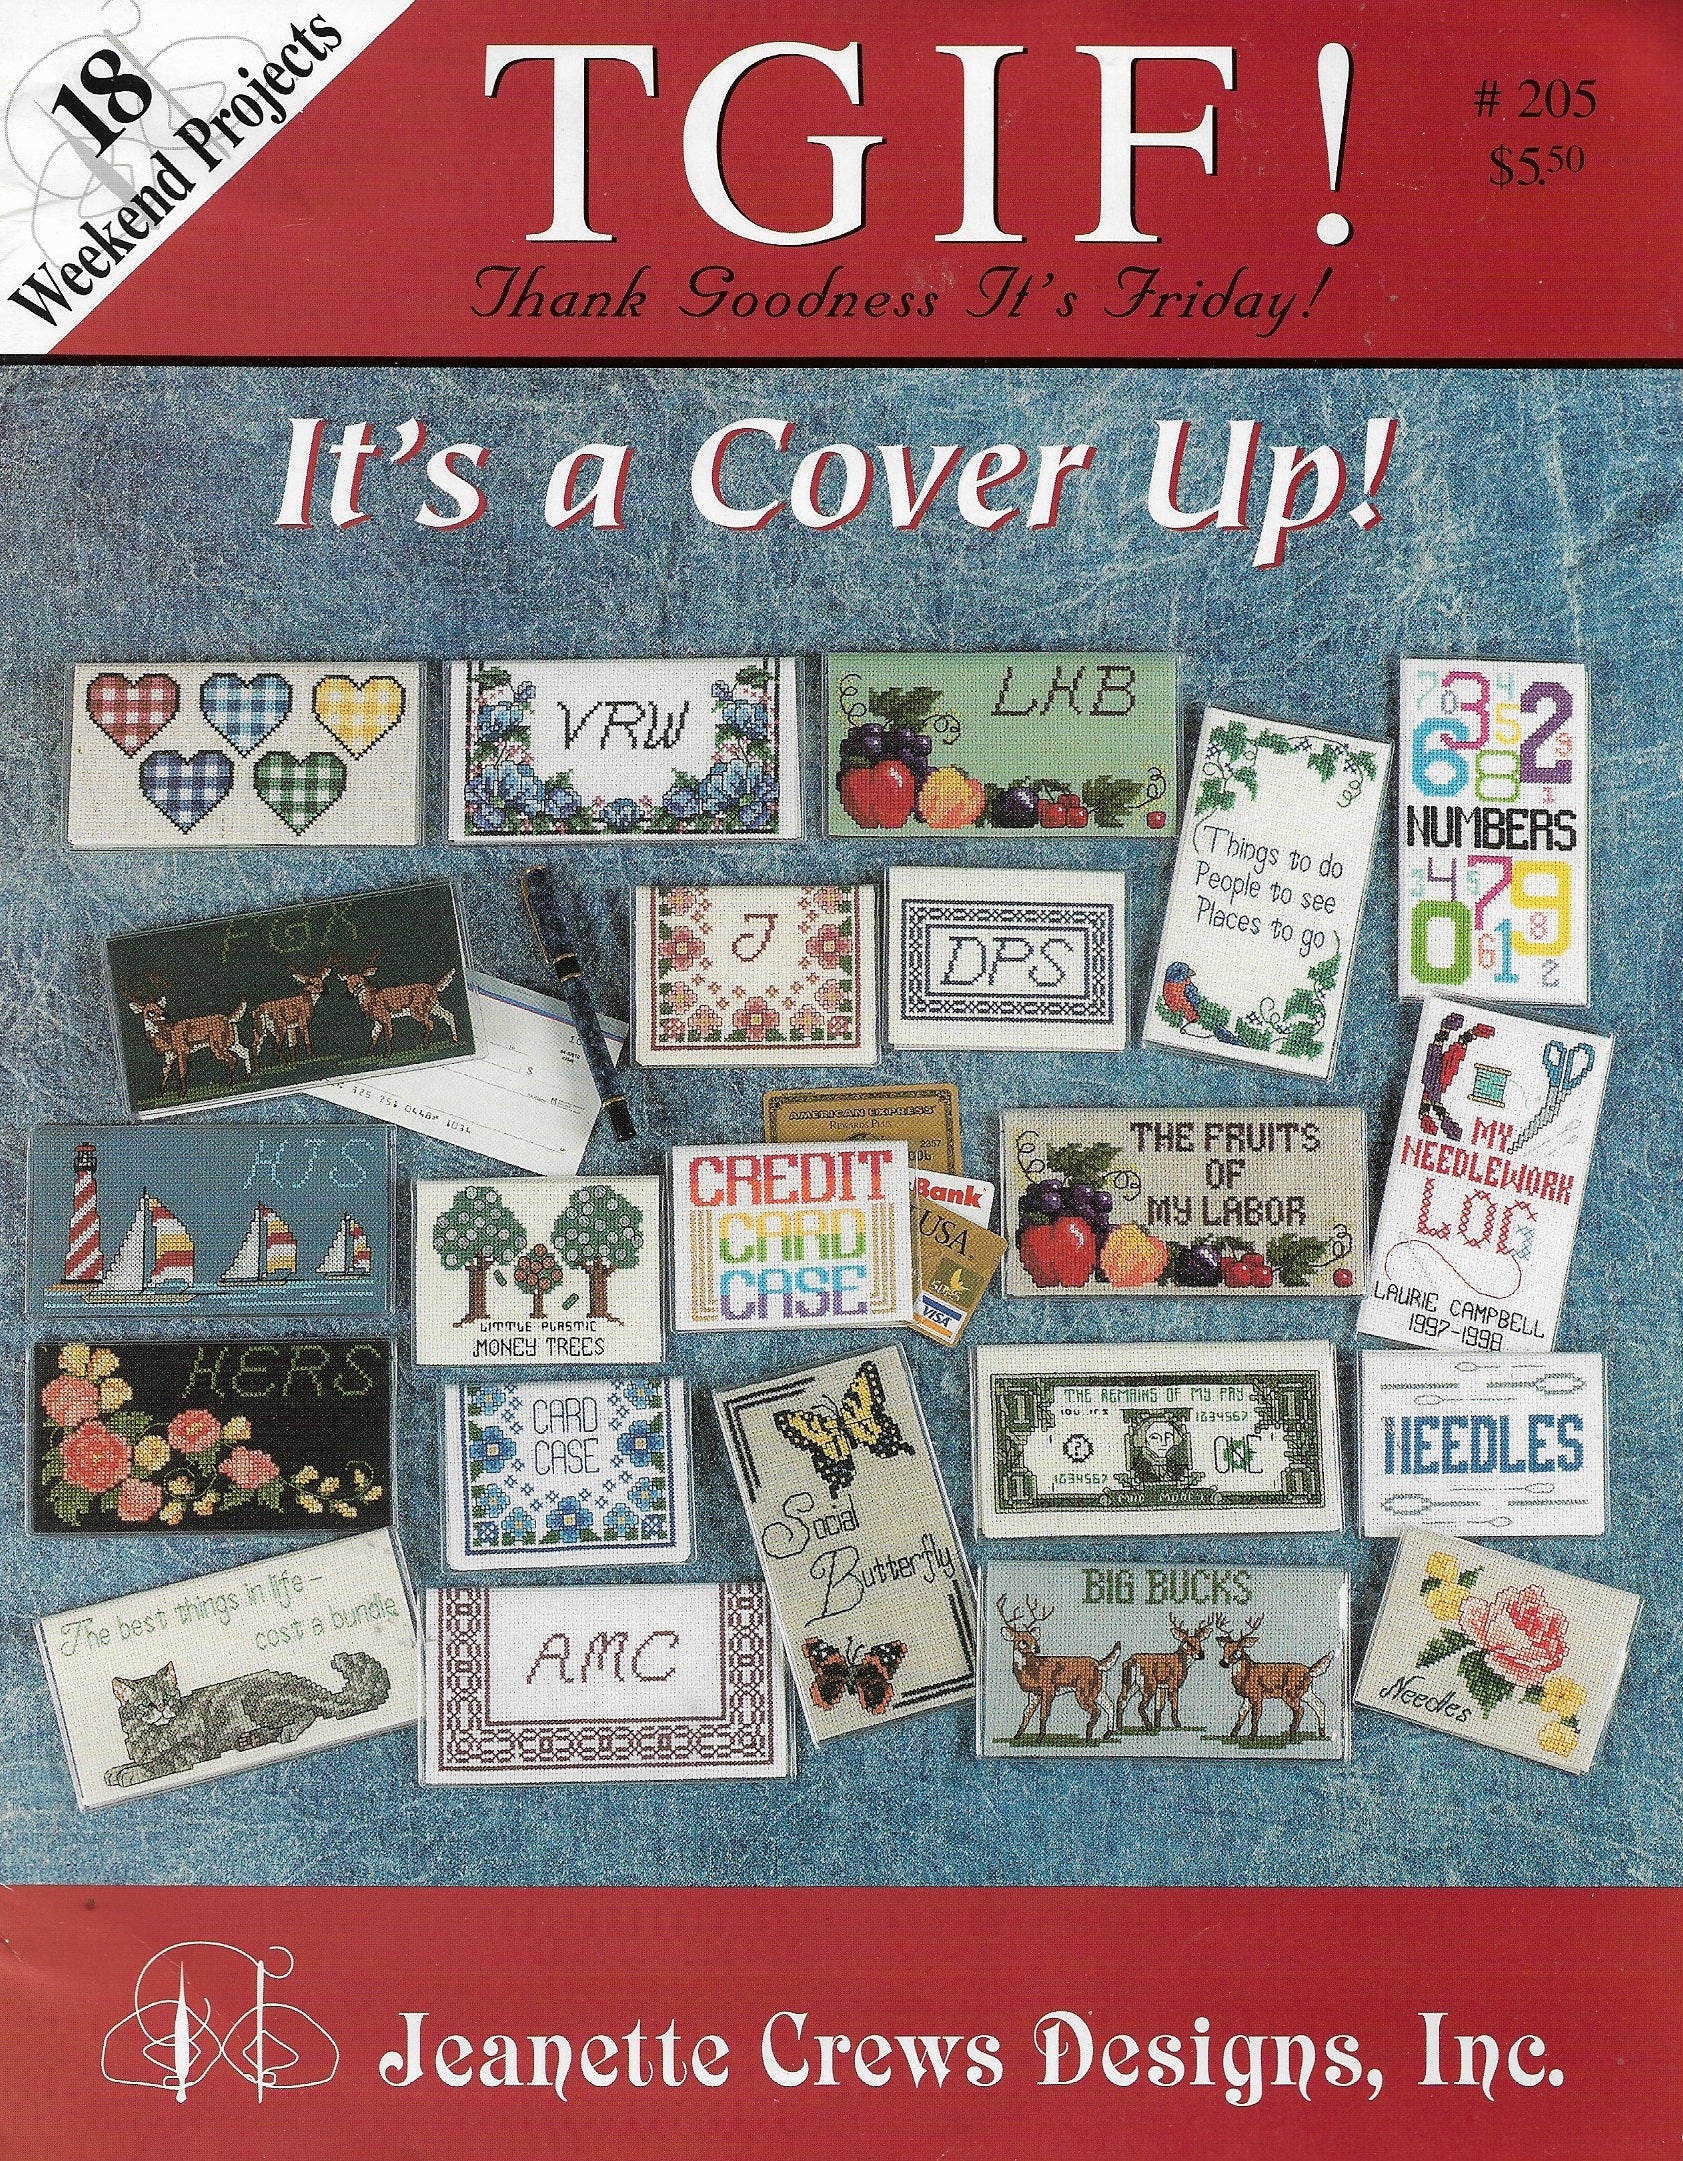 Jeanette Crews TGIF It's a cover up ceoss stitch patterns